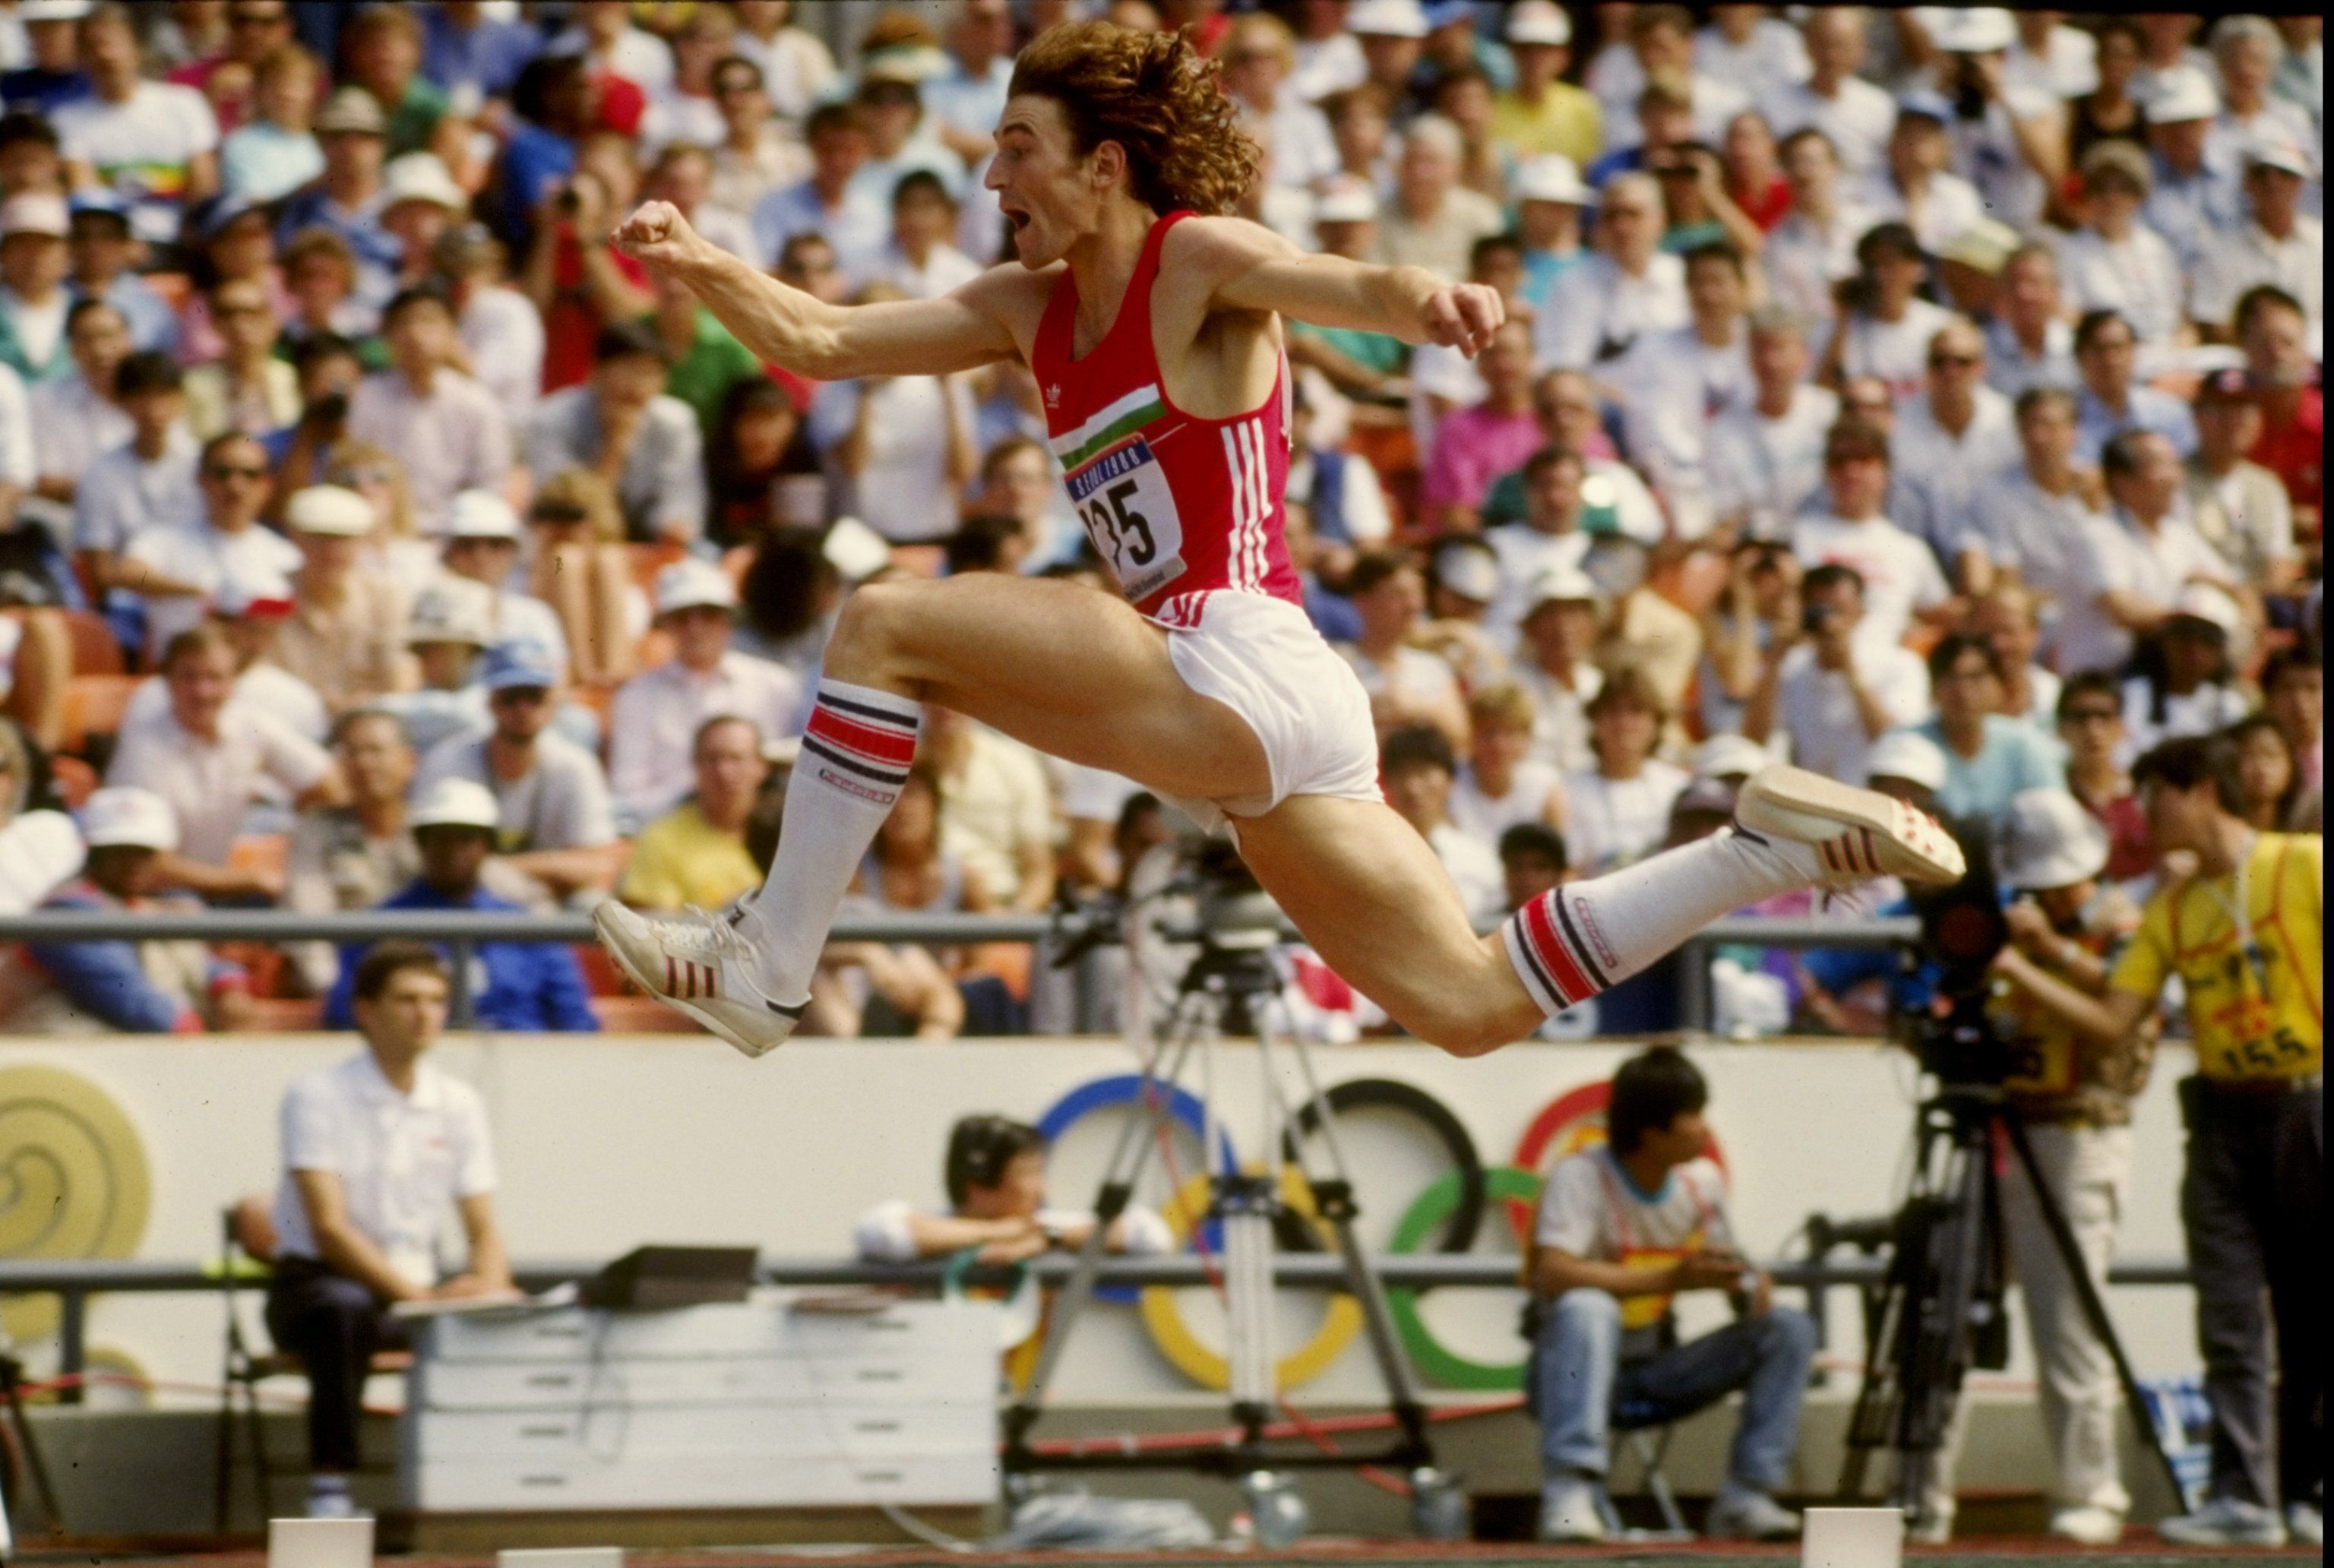 Khristo Markov at the 1988 Olympic Games in Seoul